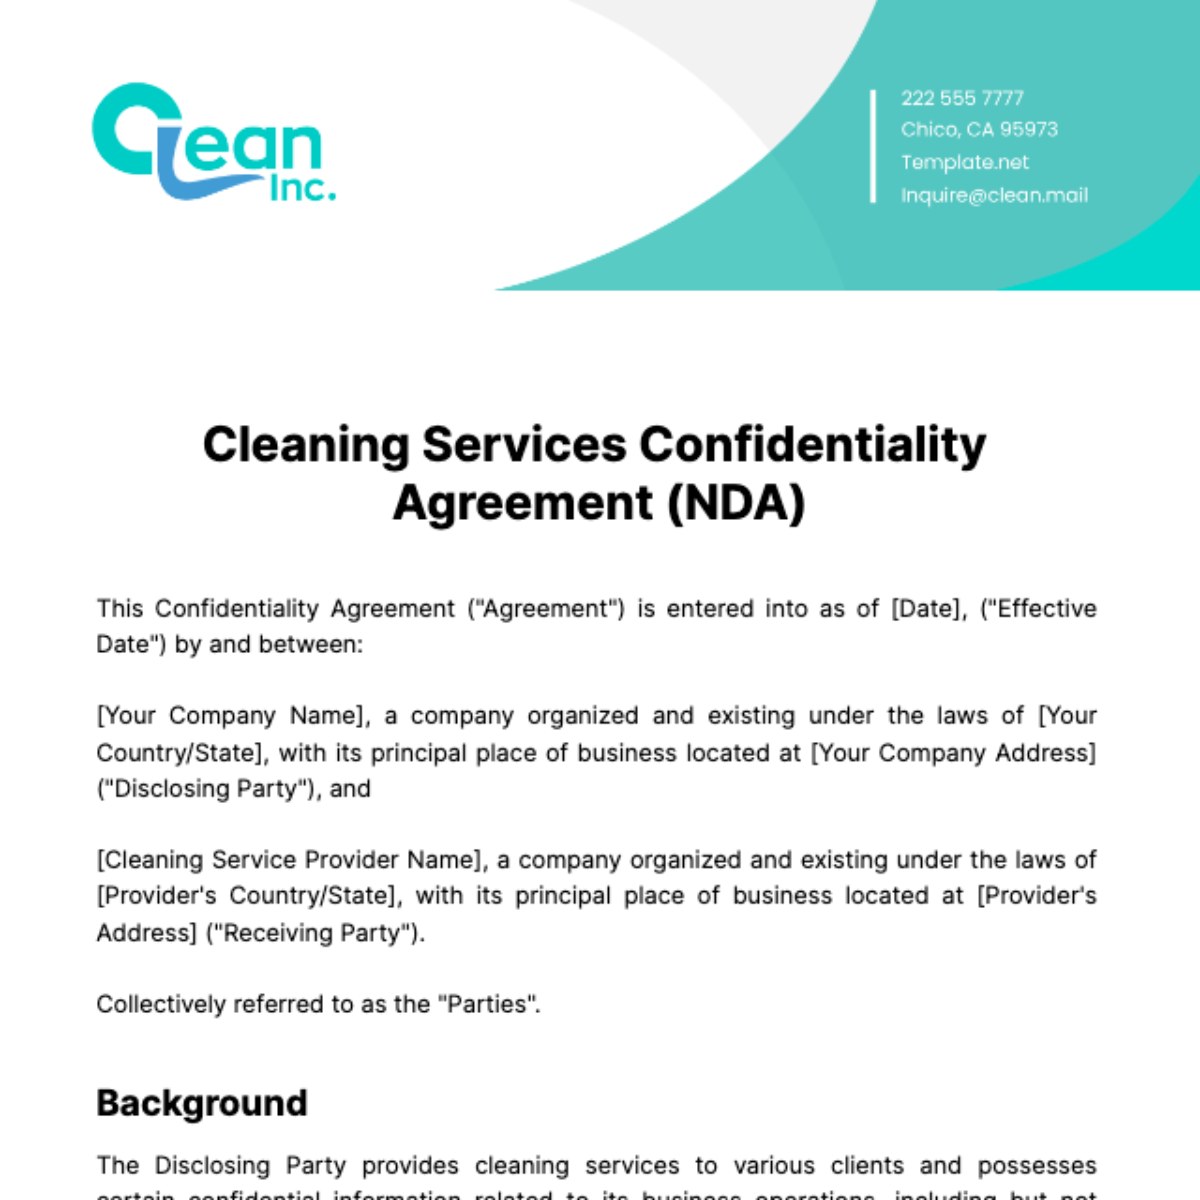 Cleaning Services Confidentiality Agreement (NDA) Template